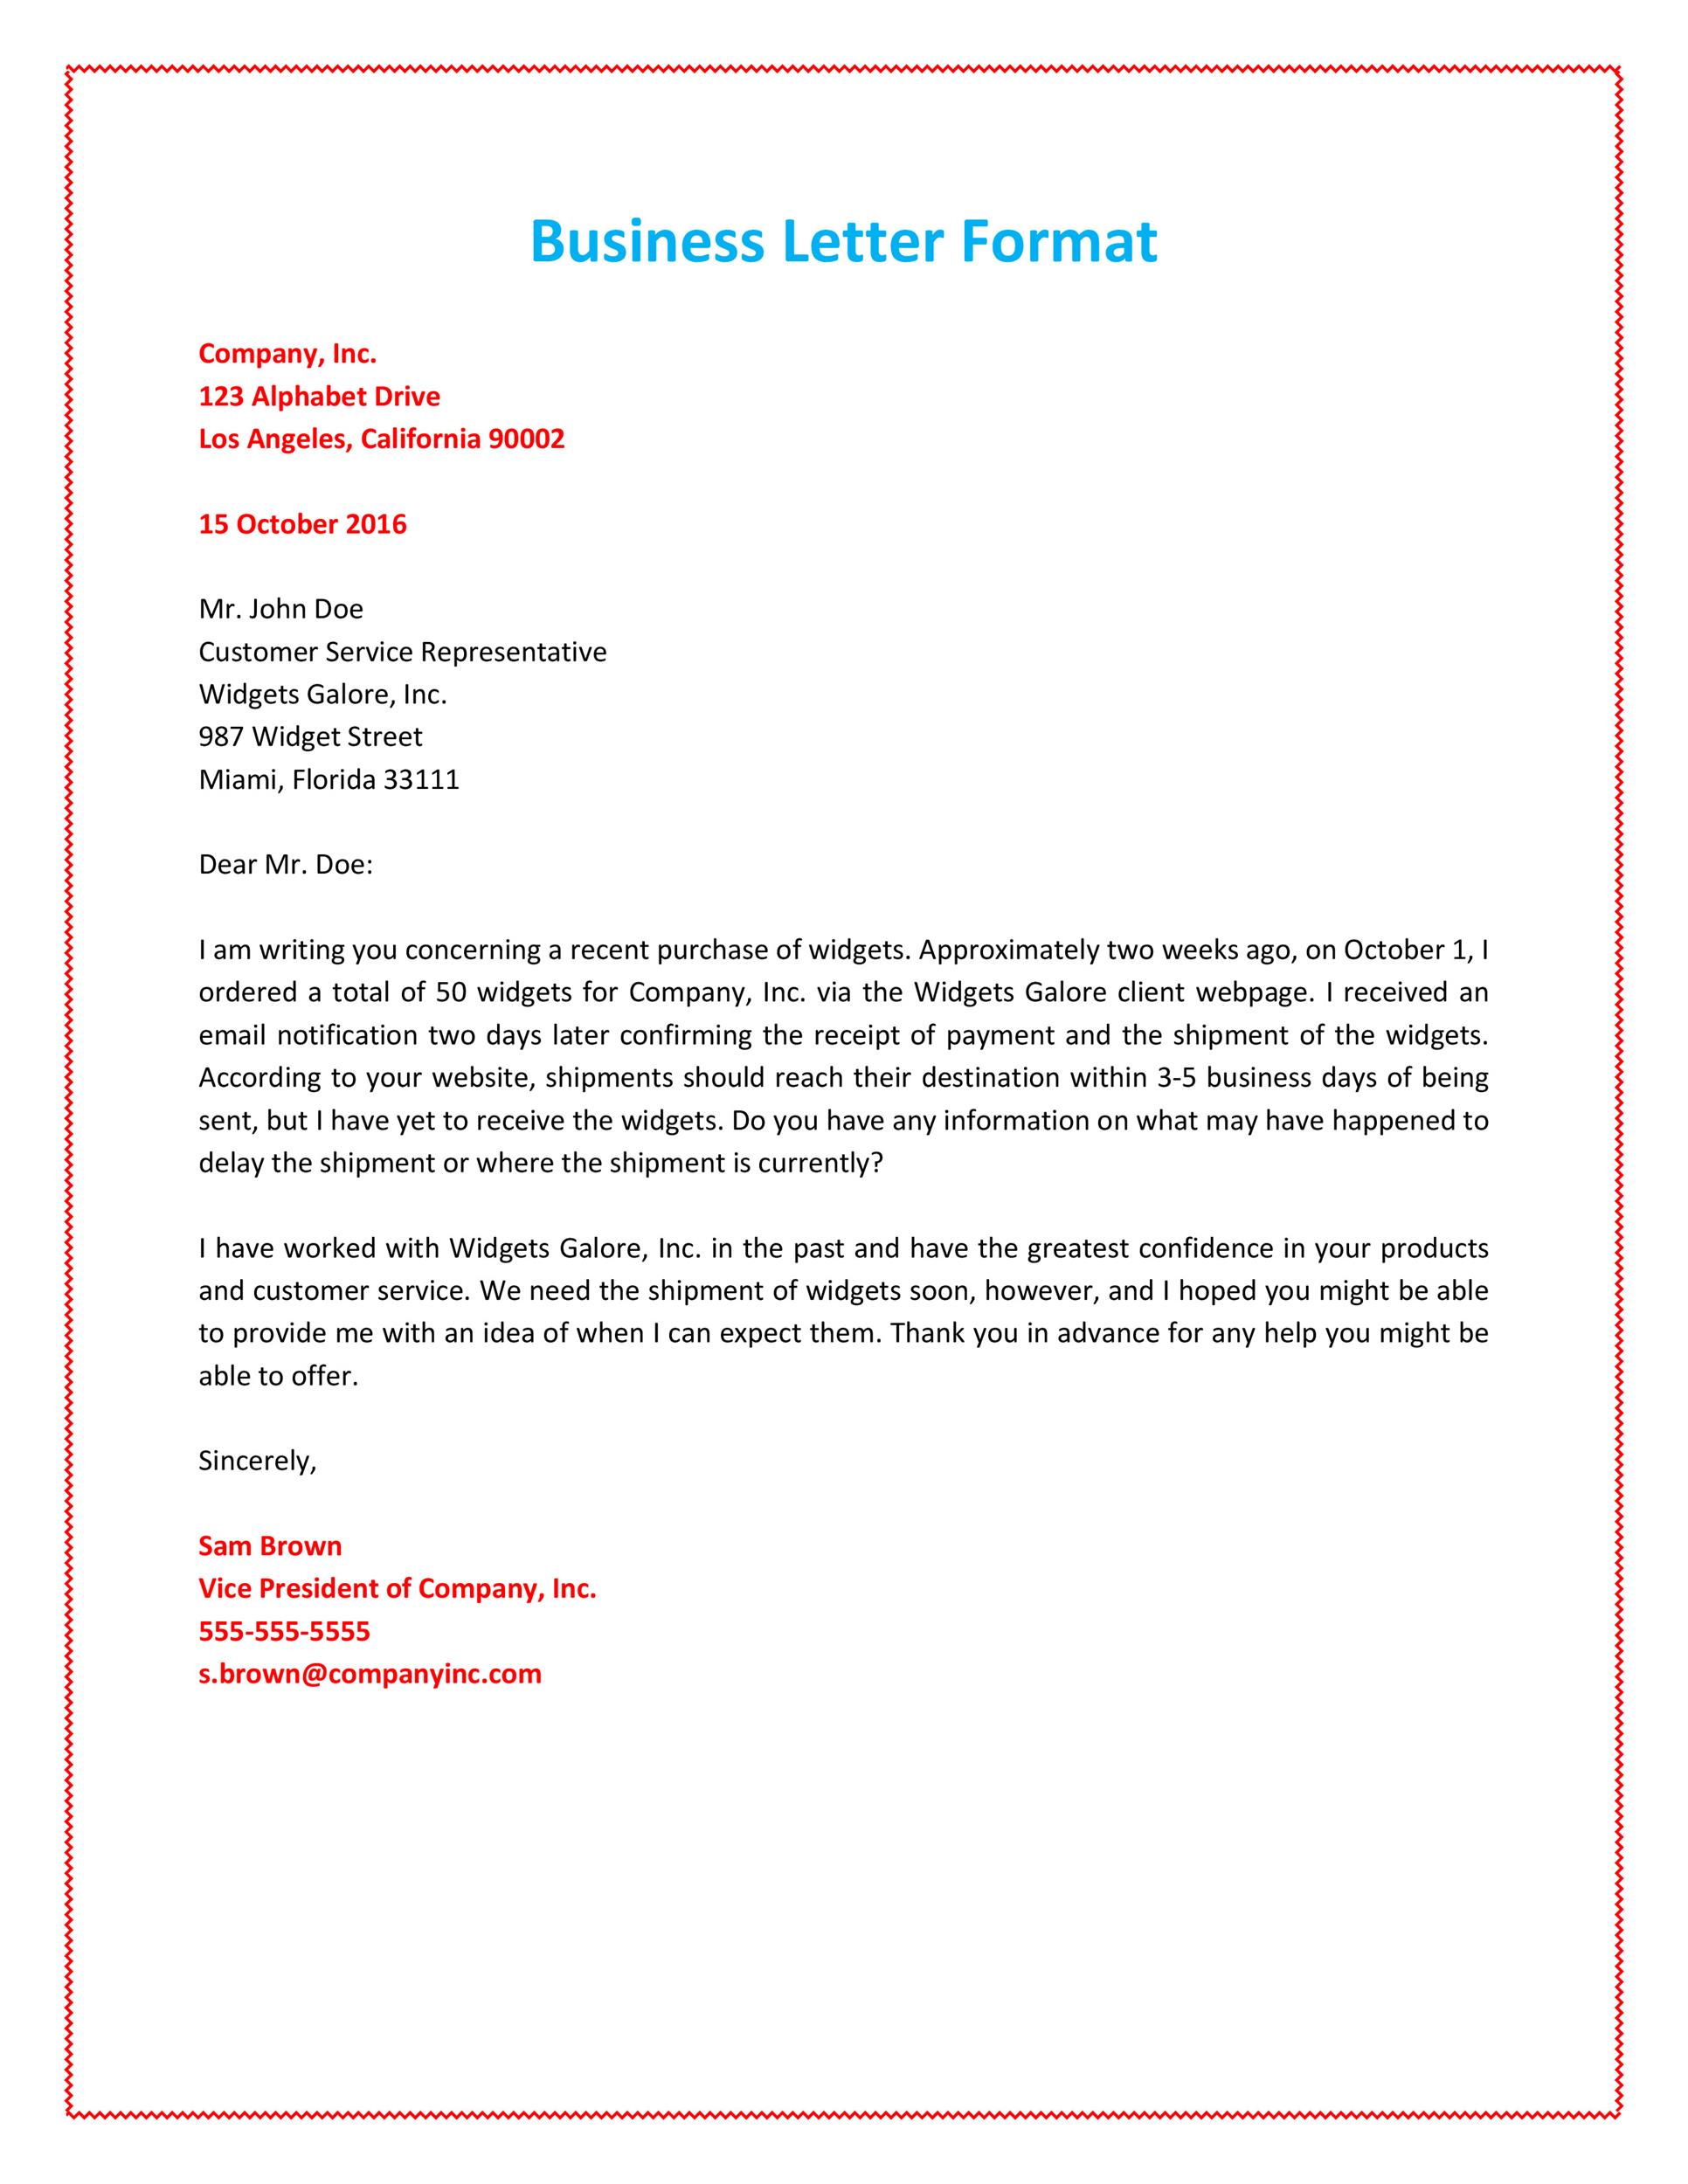 How To Write A Business Letter In Block Format Sample